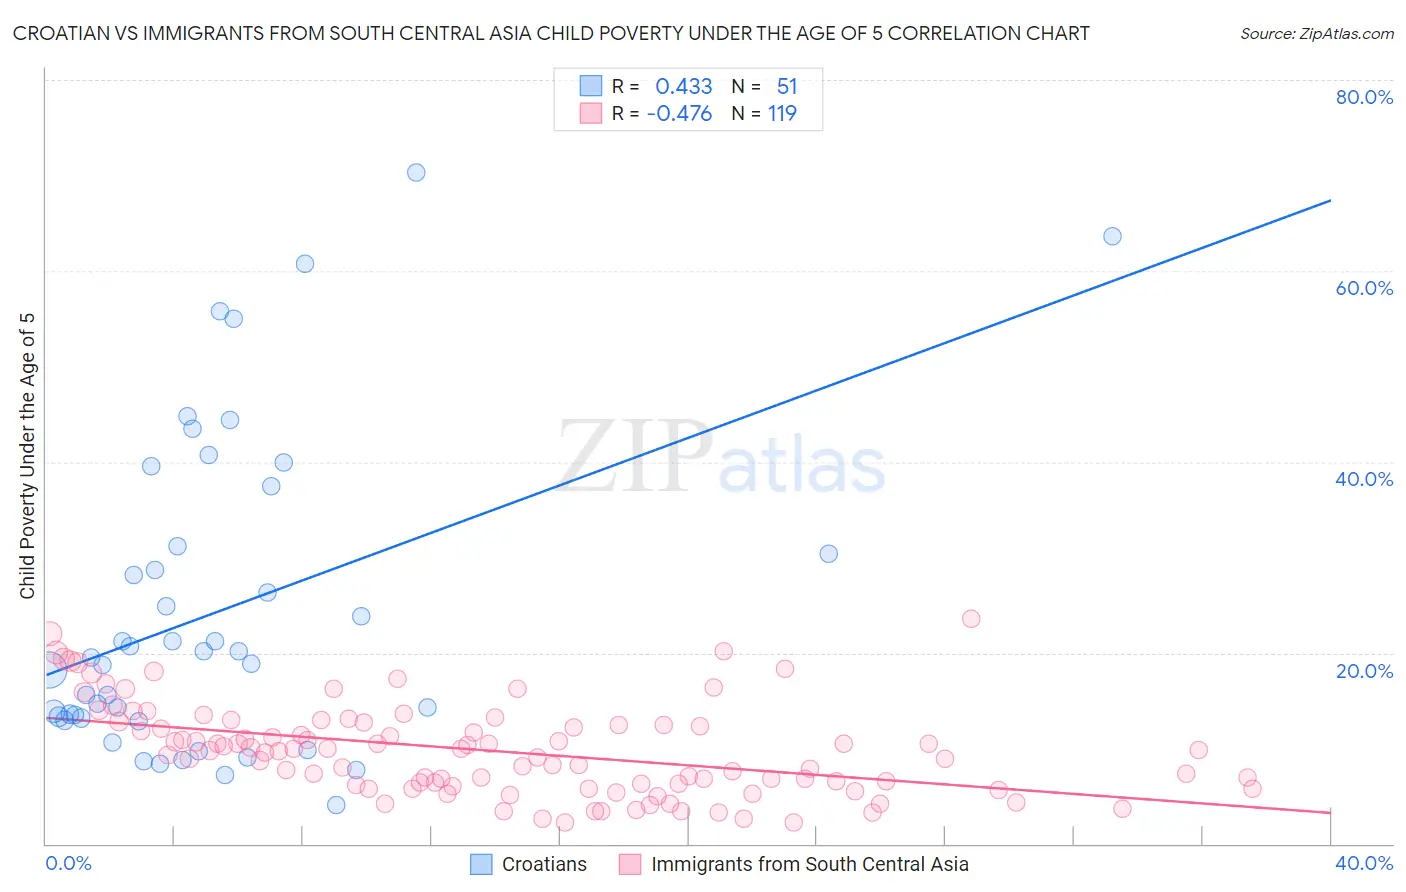 Croatian vs Immigrants from South Central Asia Child Poverty Under the Age of 5